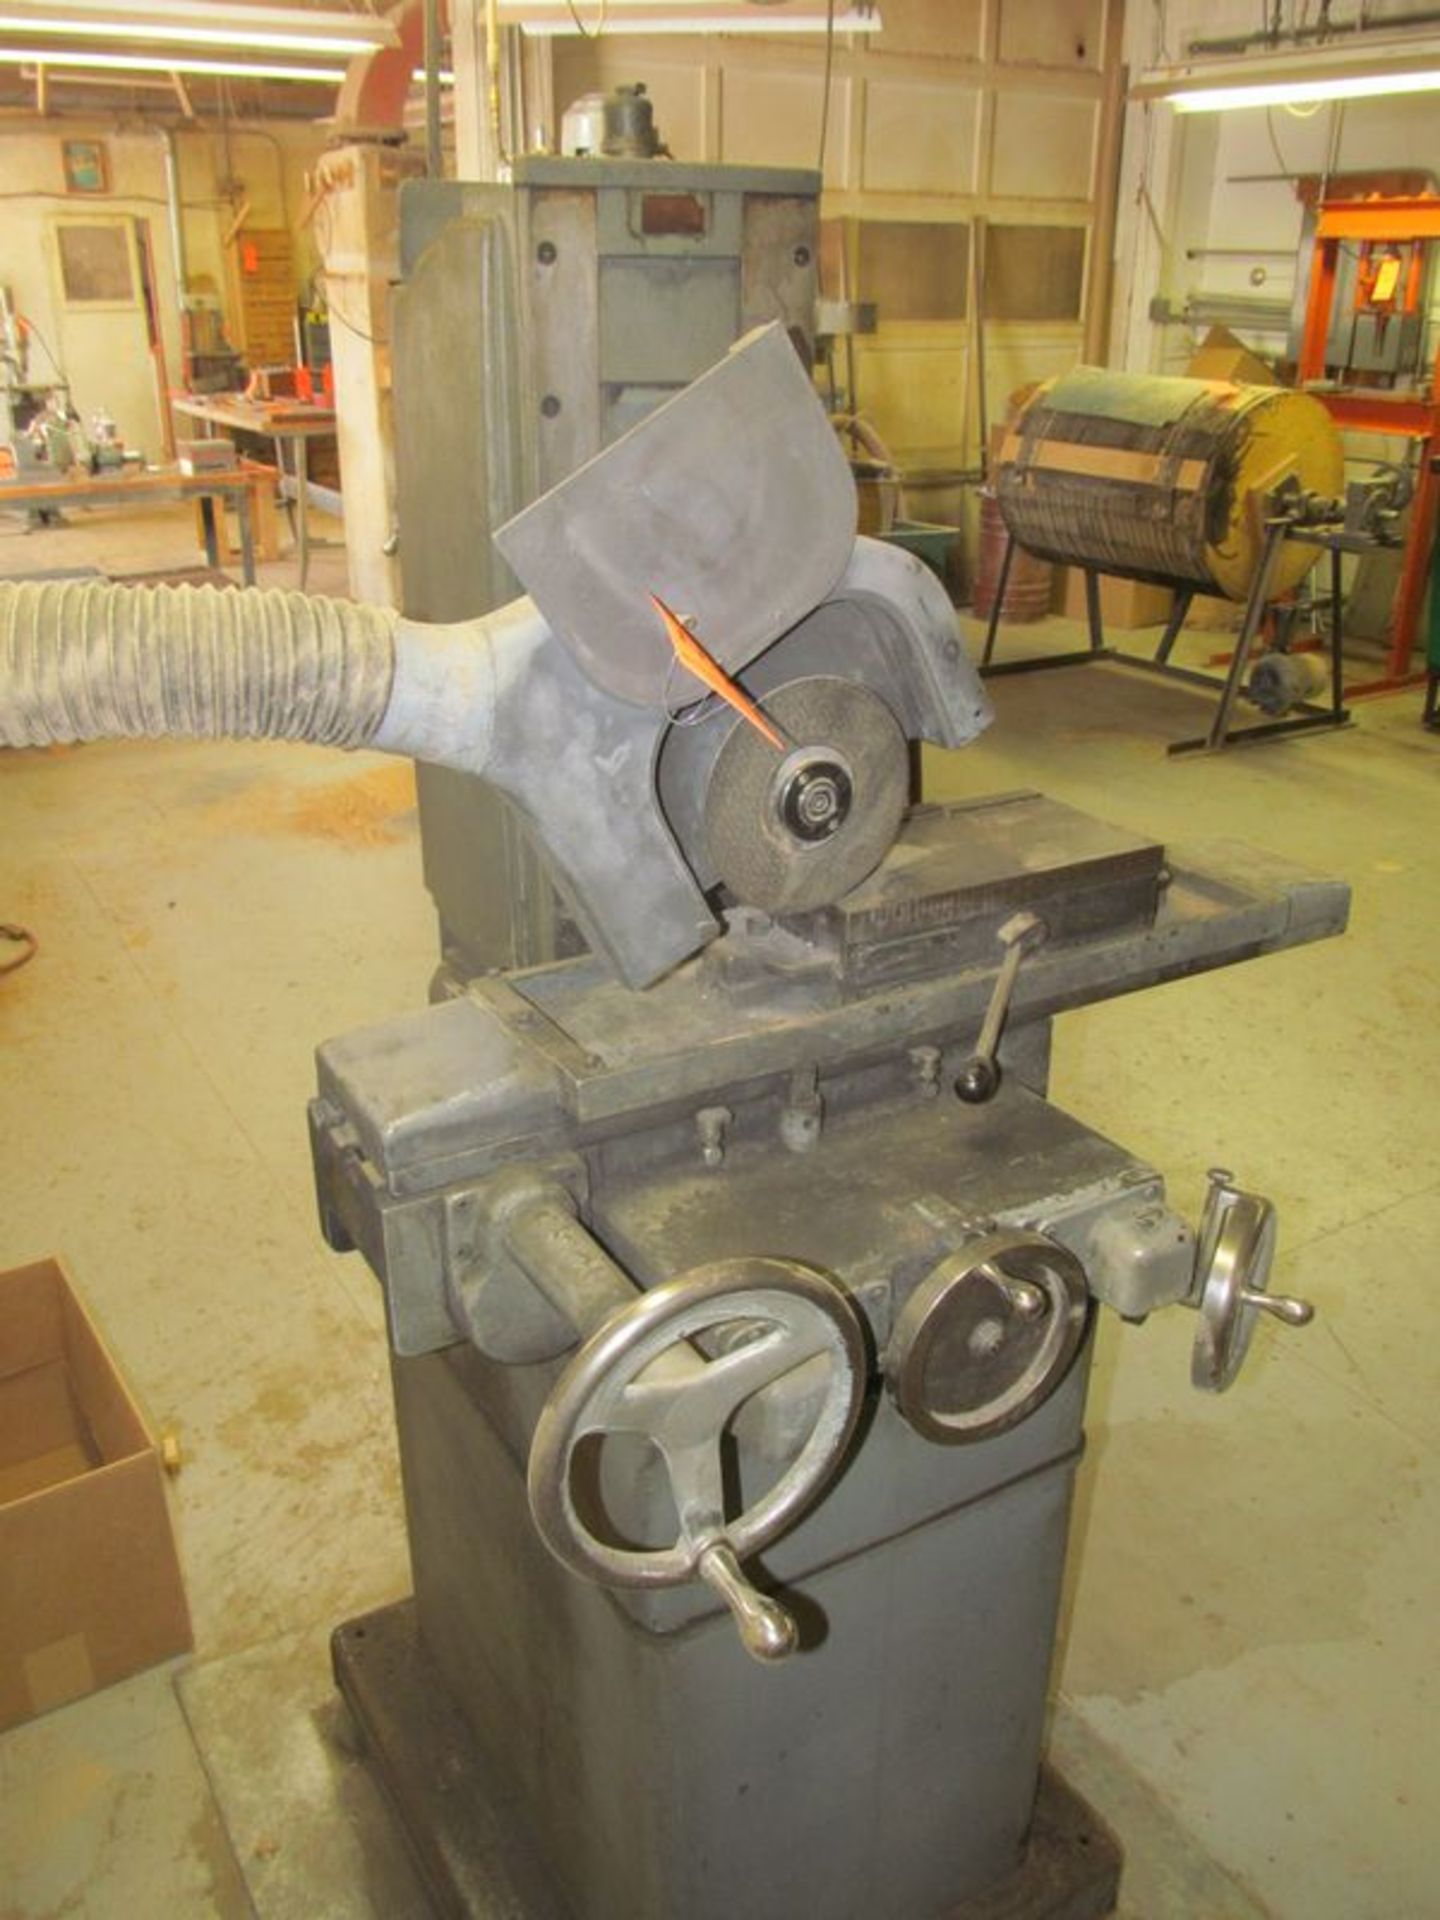 Covel surface grinder, M/N Style 7A, S/N 7A-6111, with 6" X 12" Ceramax magnetic chuck - Image 2 of 2